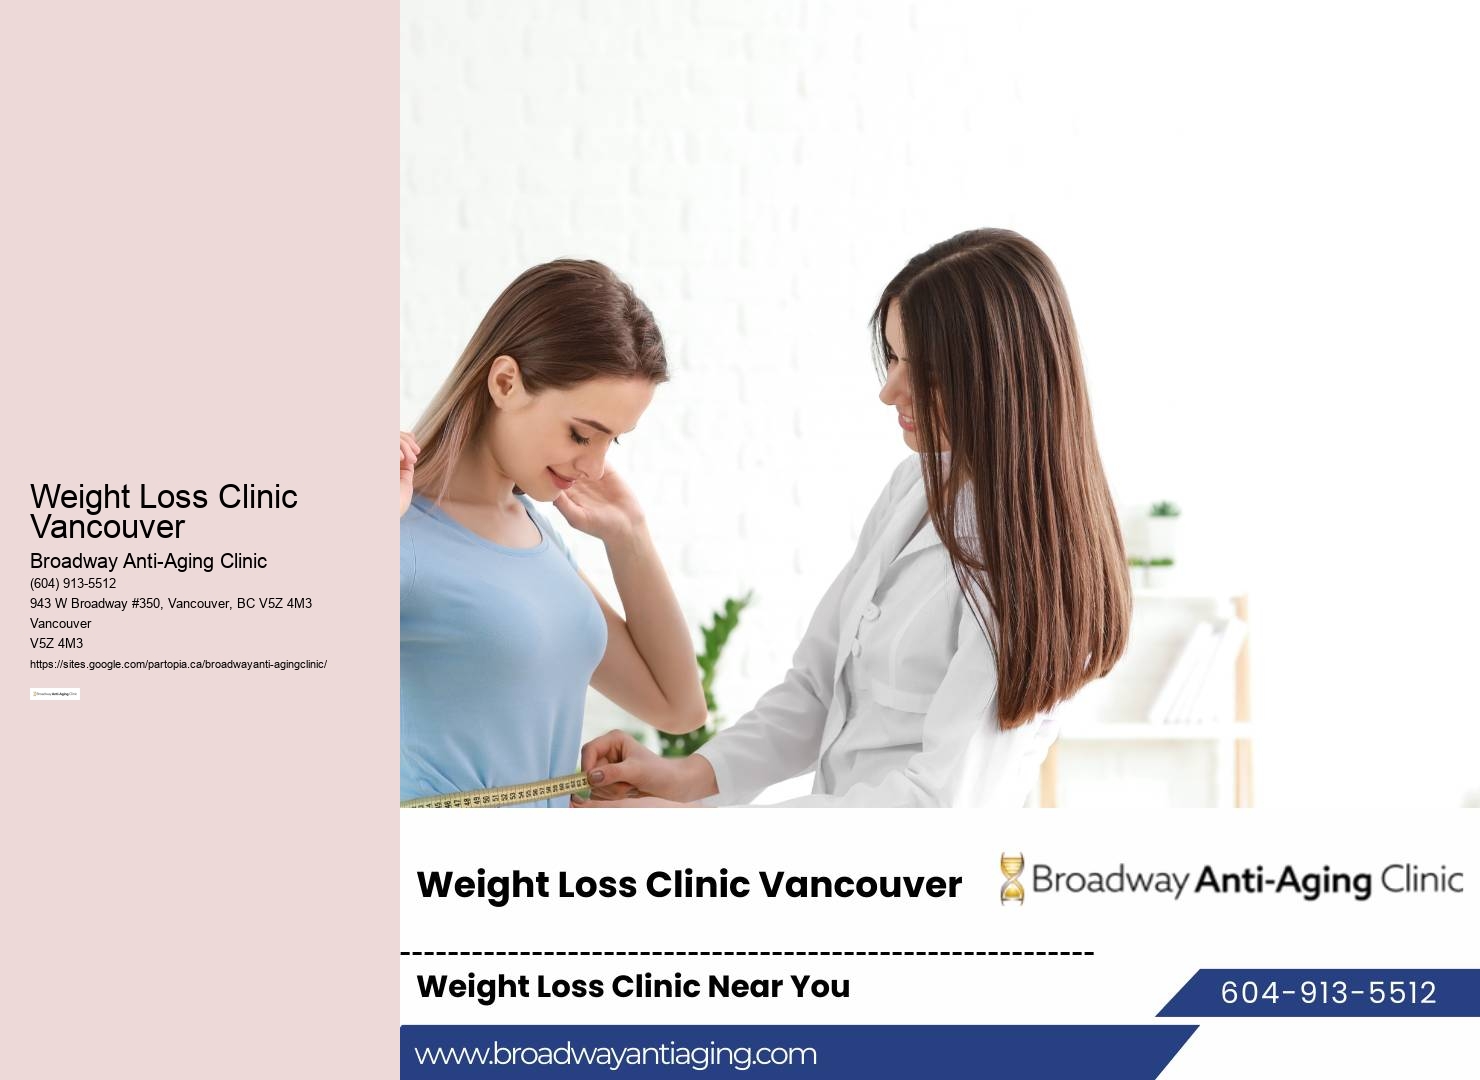 Vancouver Weight Loss Treatment Clinic